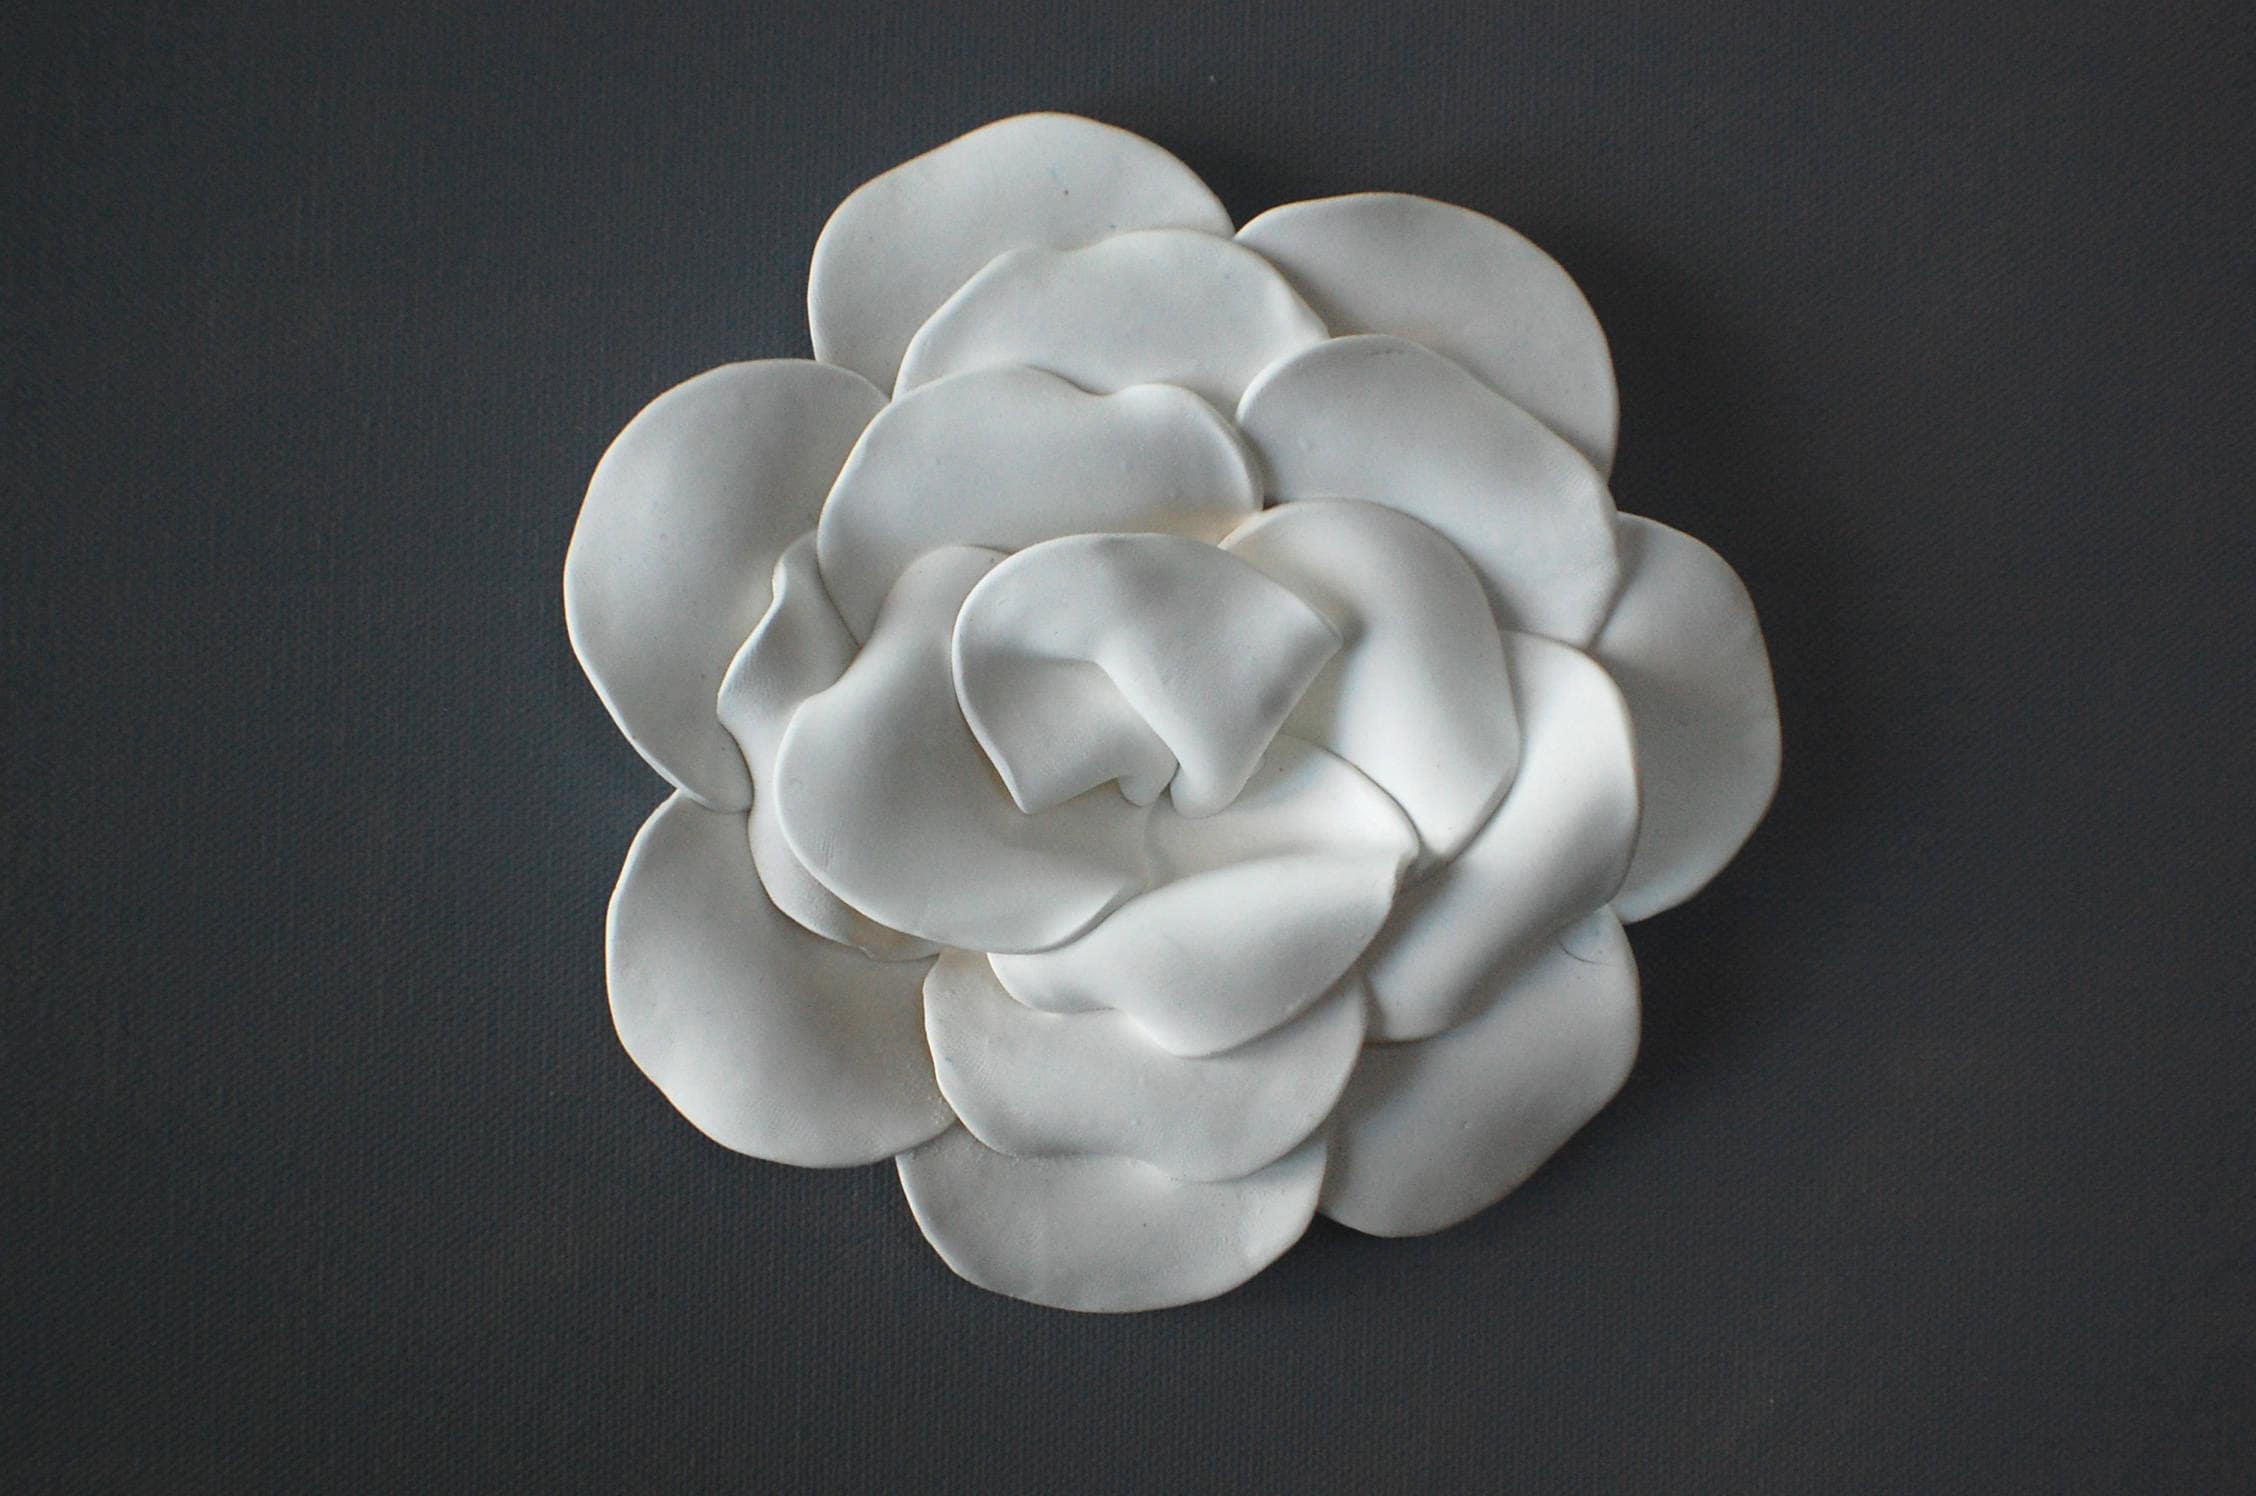 Camellia Flower Wall Sculpture Coffee Table Ornament White 